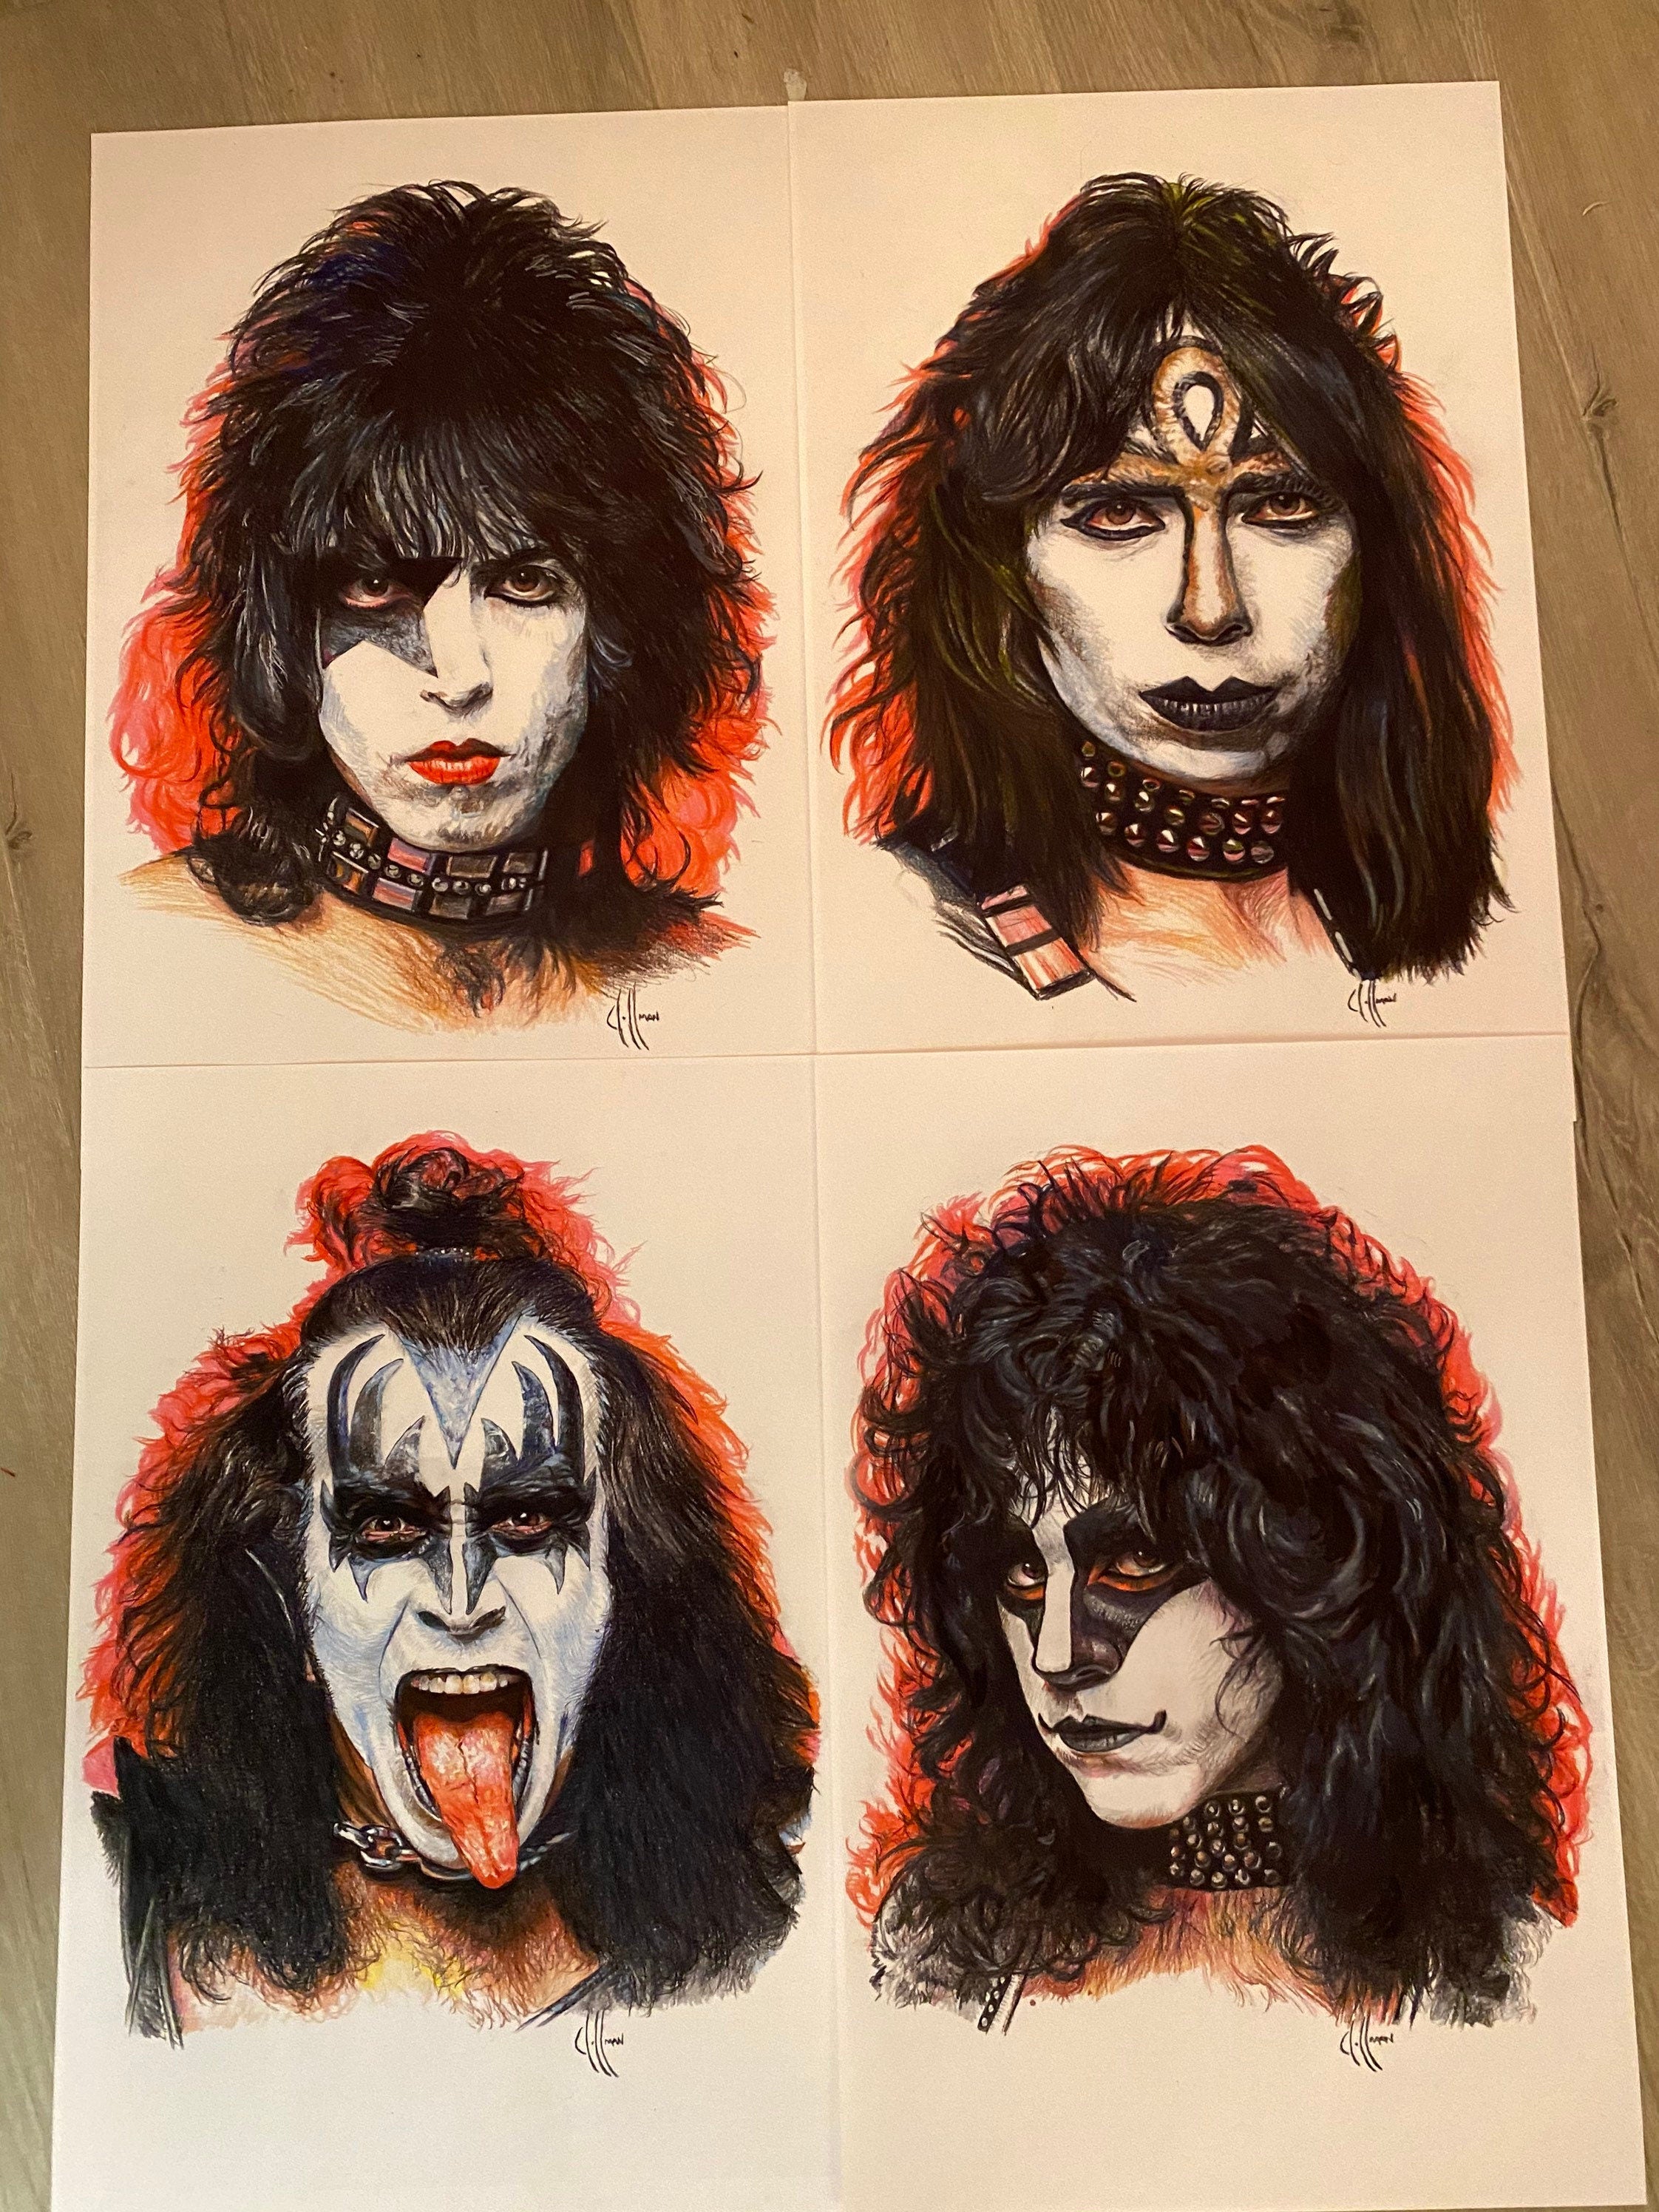 Kiss Member Creatures of the Night Wall Decor